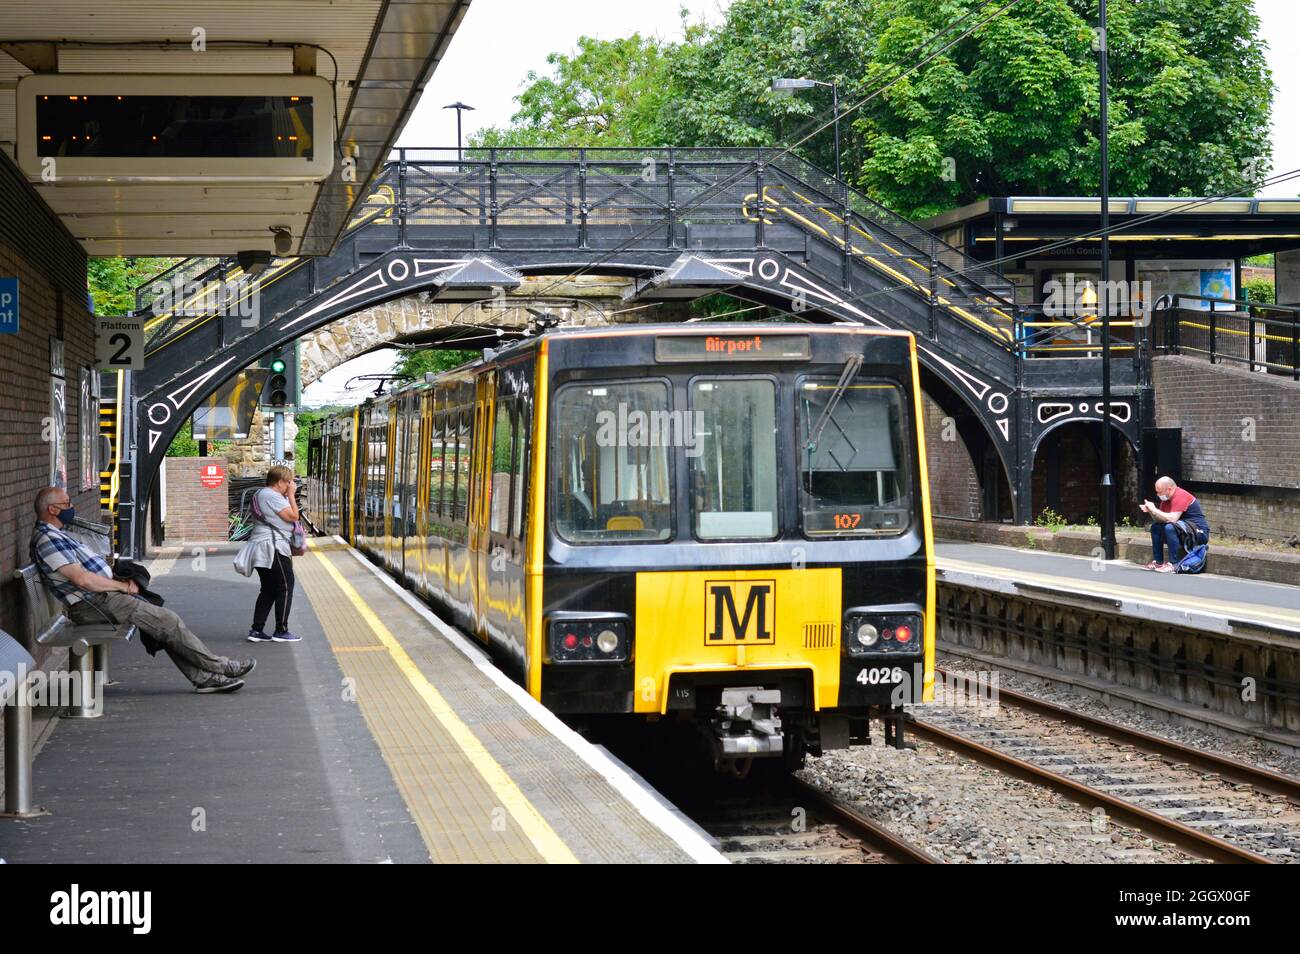 NEWCASTLE. TYNE and WEAR. ENGLAND. 06-24-21. Ilford Road Metro station on the region's light rail system. A train is veaving with a service for the ci Stock Photo